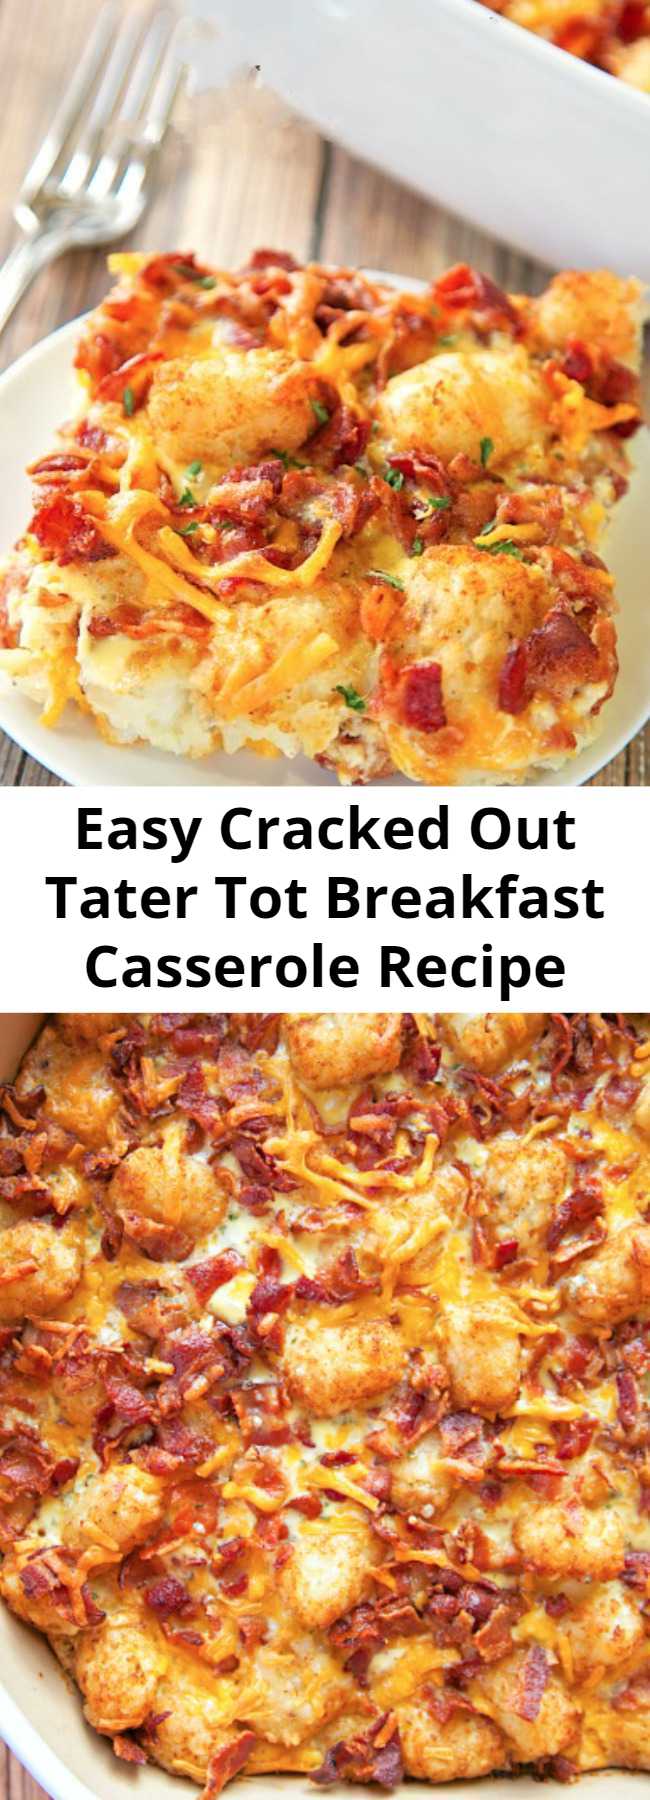 Easy Cracked Out Tater Tot Breakfast Casserole Recipe - Great make-ahead recipe! Only 6 ingredients!! Bacon, cheddar cheese, tater tots, eggs, milk, Ranch mix. Can refrigerate or freeze for later. Great for breakfast. lunch or dinner. Everyone loves this easy breakfast casserole!! #breakfast #casserole #tatertots #bacon #freezermeal